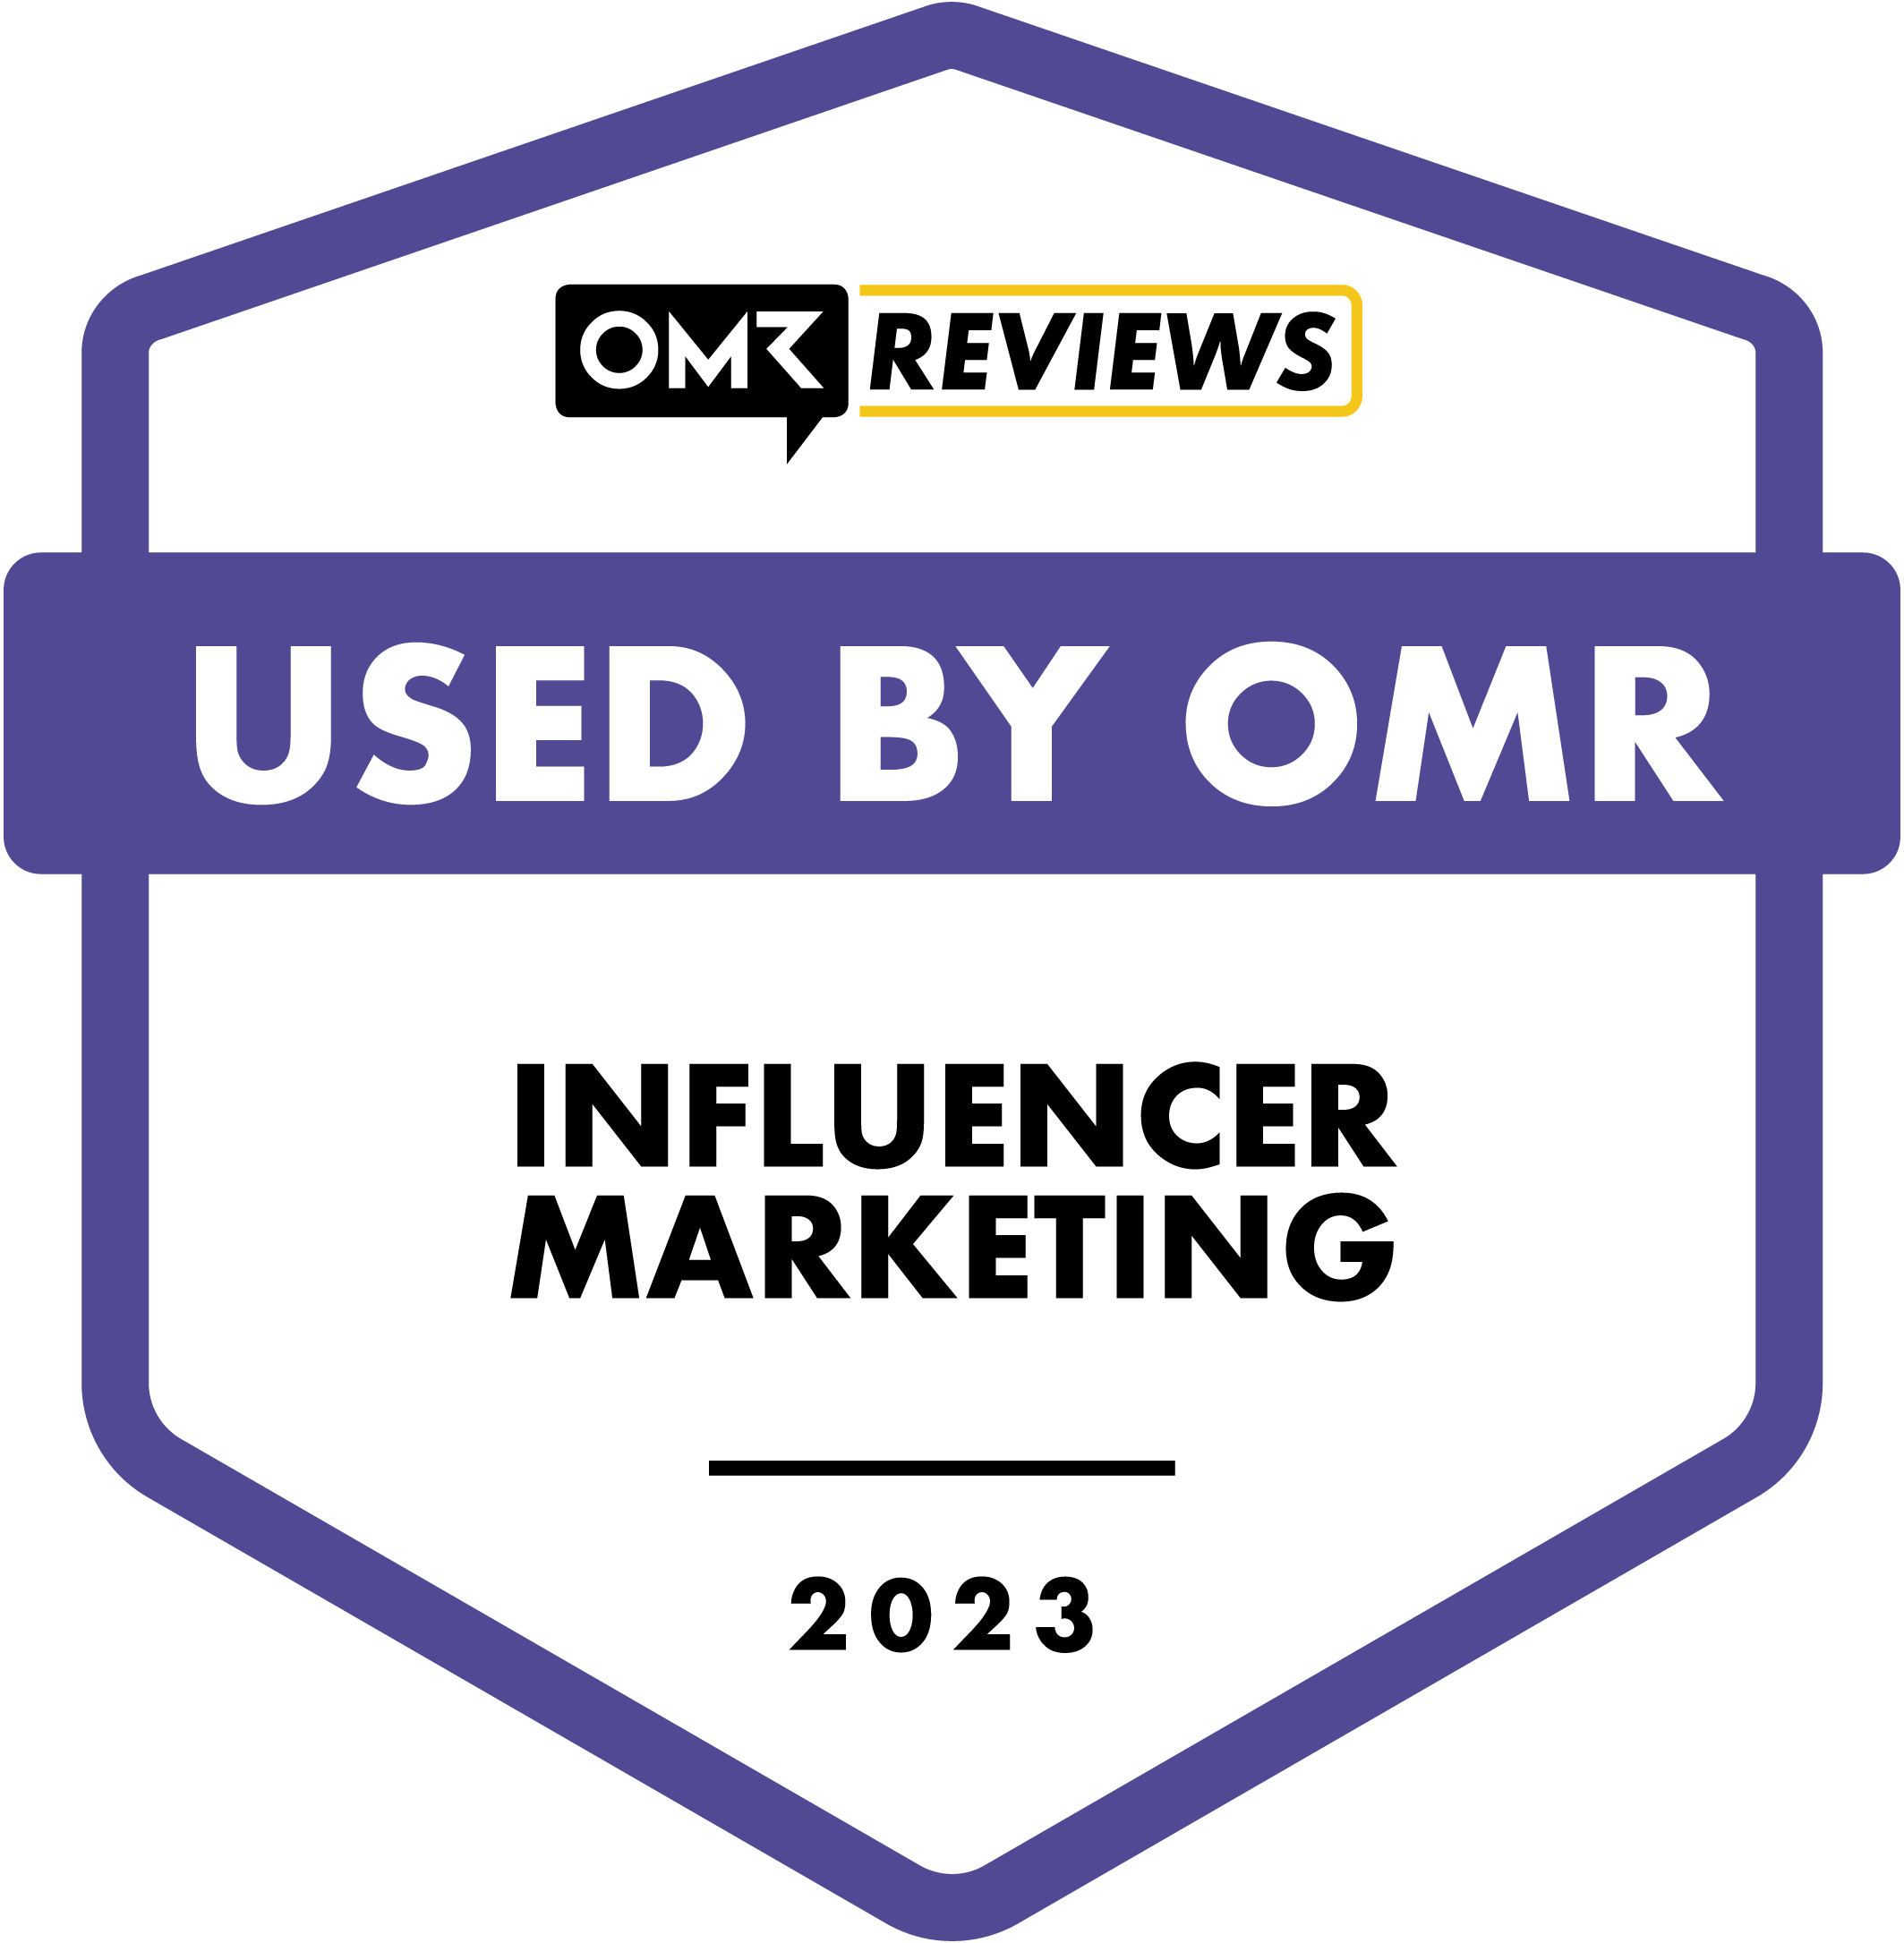 Used by OMR Influencer Marketing Tool Badge by OMR 2023